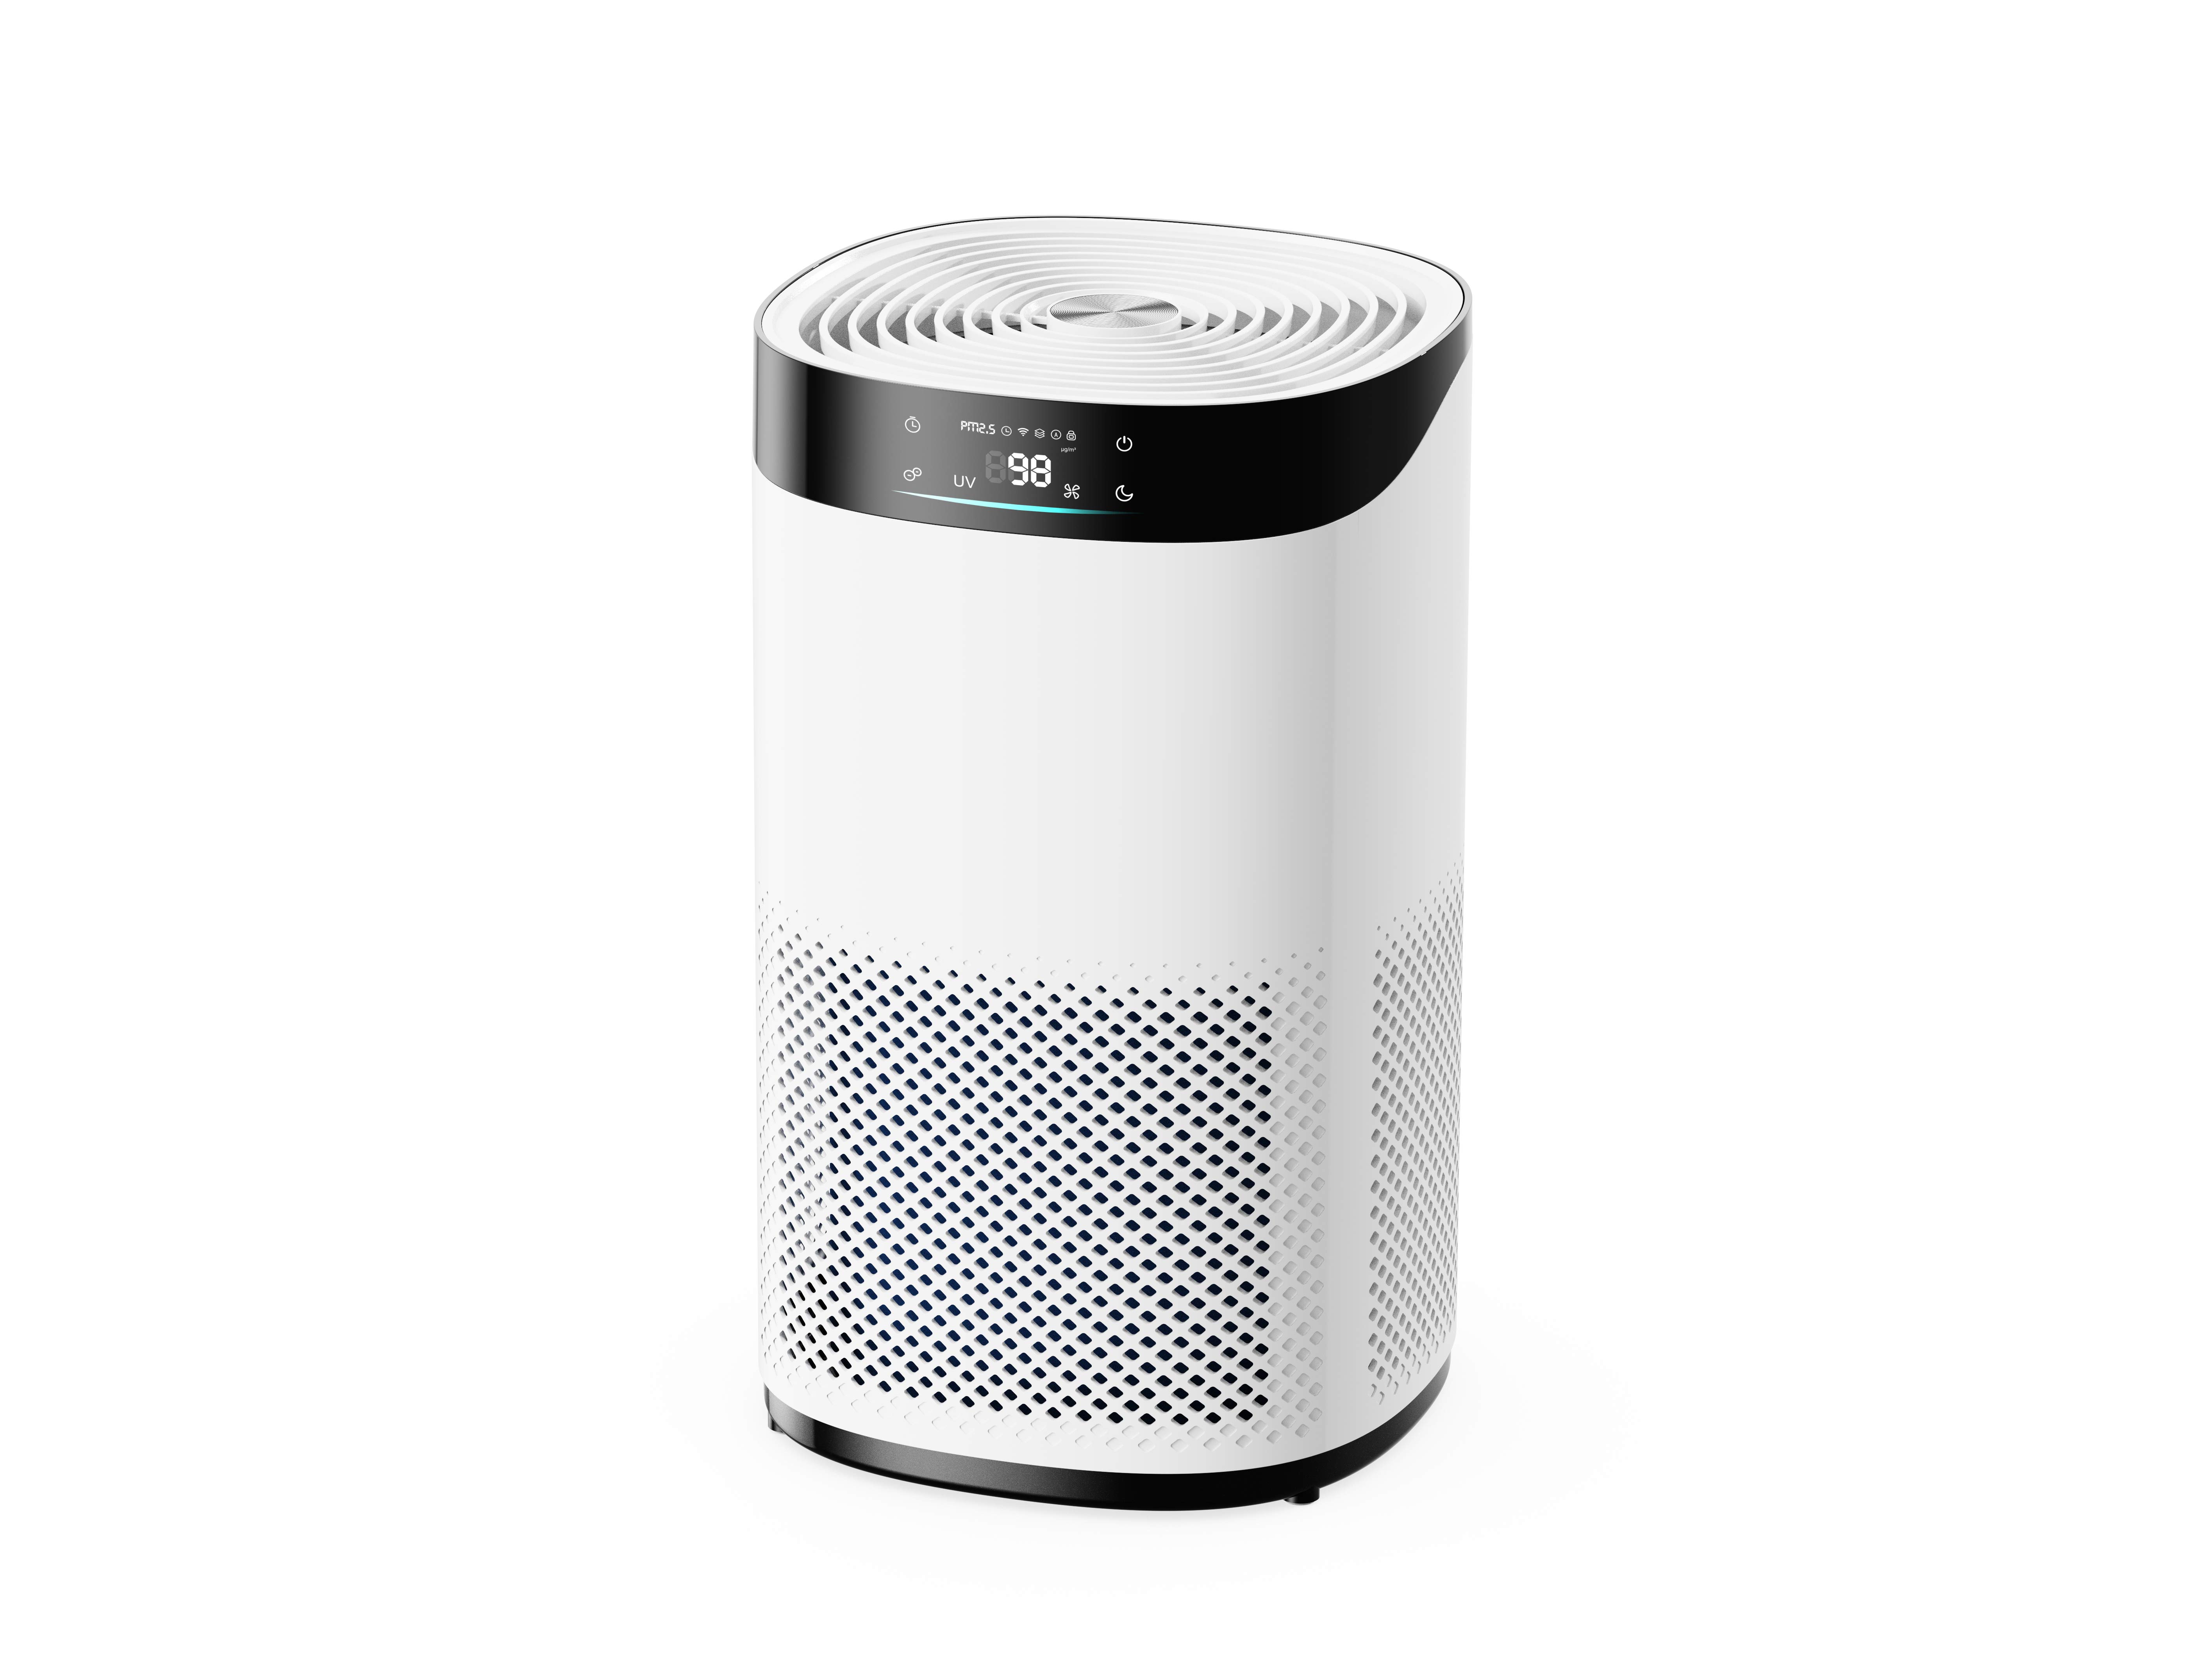 New Desktop Air Purifier with humidification KJ260